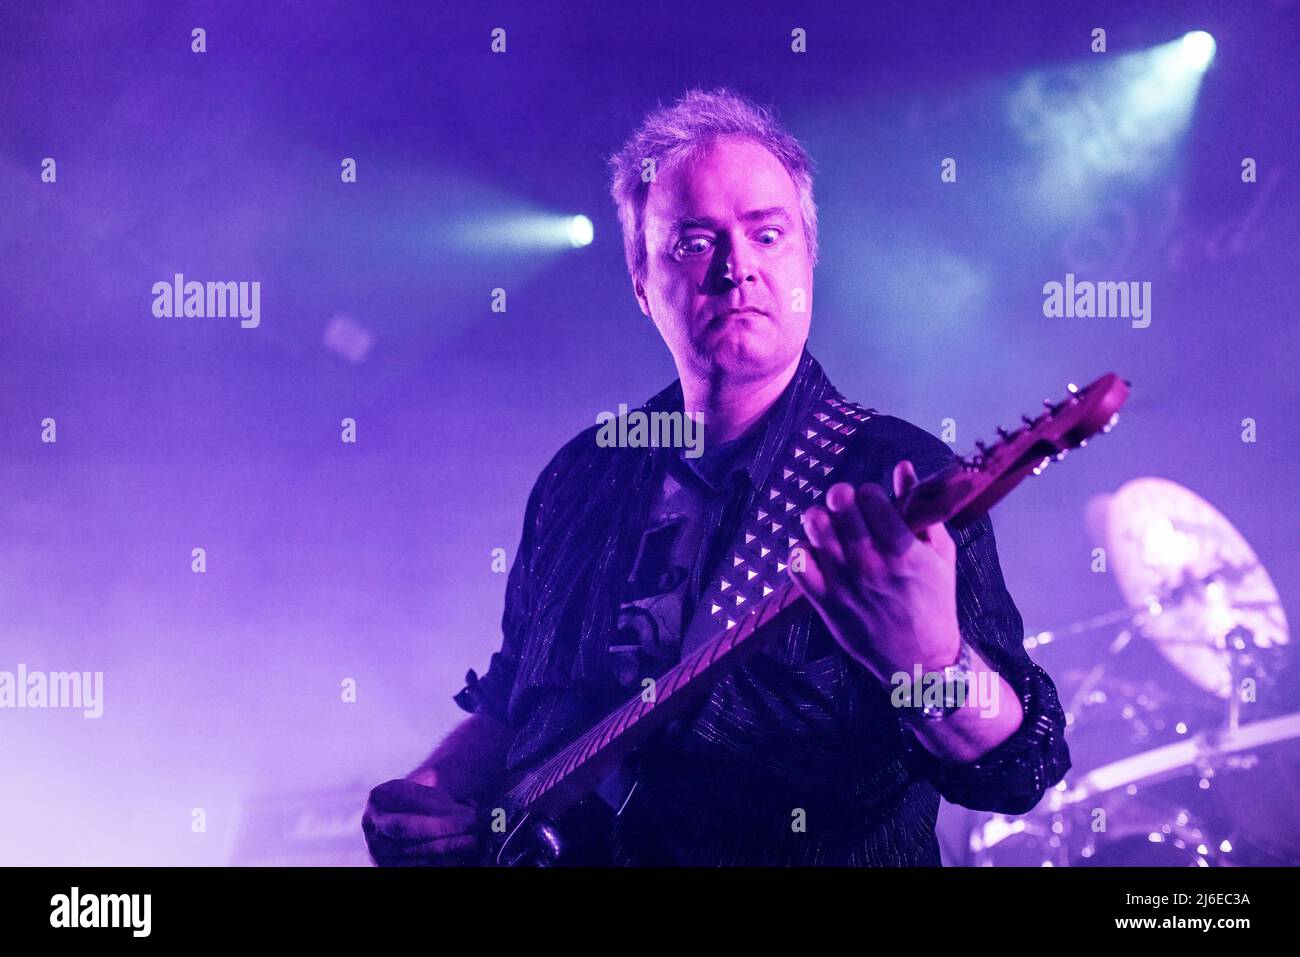 Oslo, Norway. 15th, April 2022. The Norwegian avant-garde metal band Ved Buens Ende performs a live concert at Rockefeller during the Norwegian metal festival Inferno Metal Festival 2022 in Oslo. Here guitarist Carl-Michael Eide is seen live on stage. (Photo credit: Gonzales Photo - Terje Dokken). Stock Photo